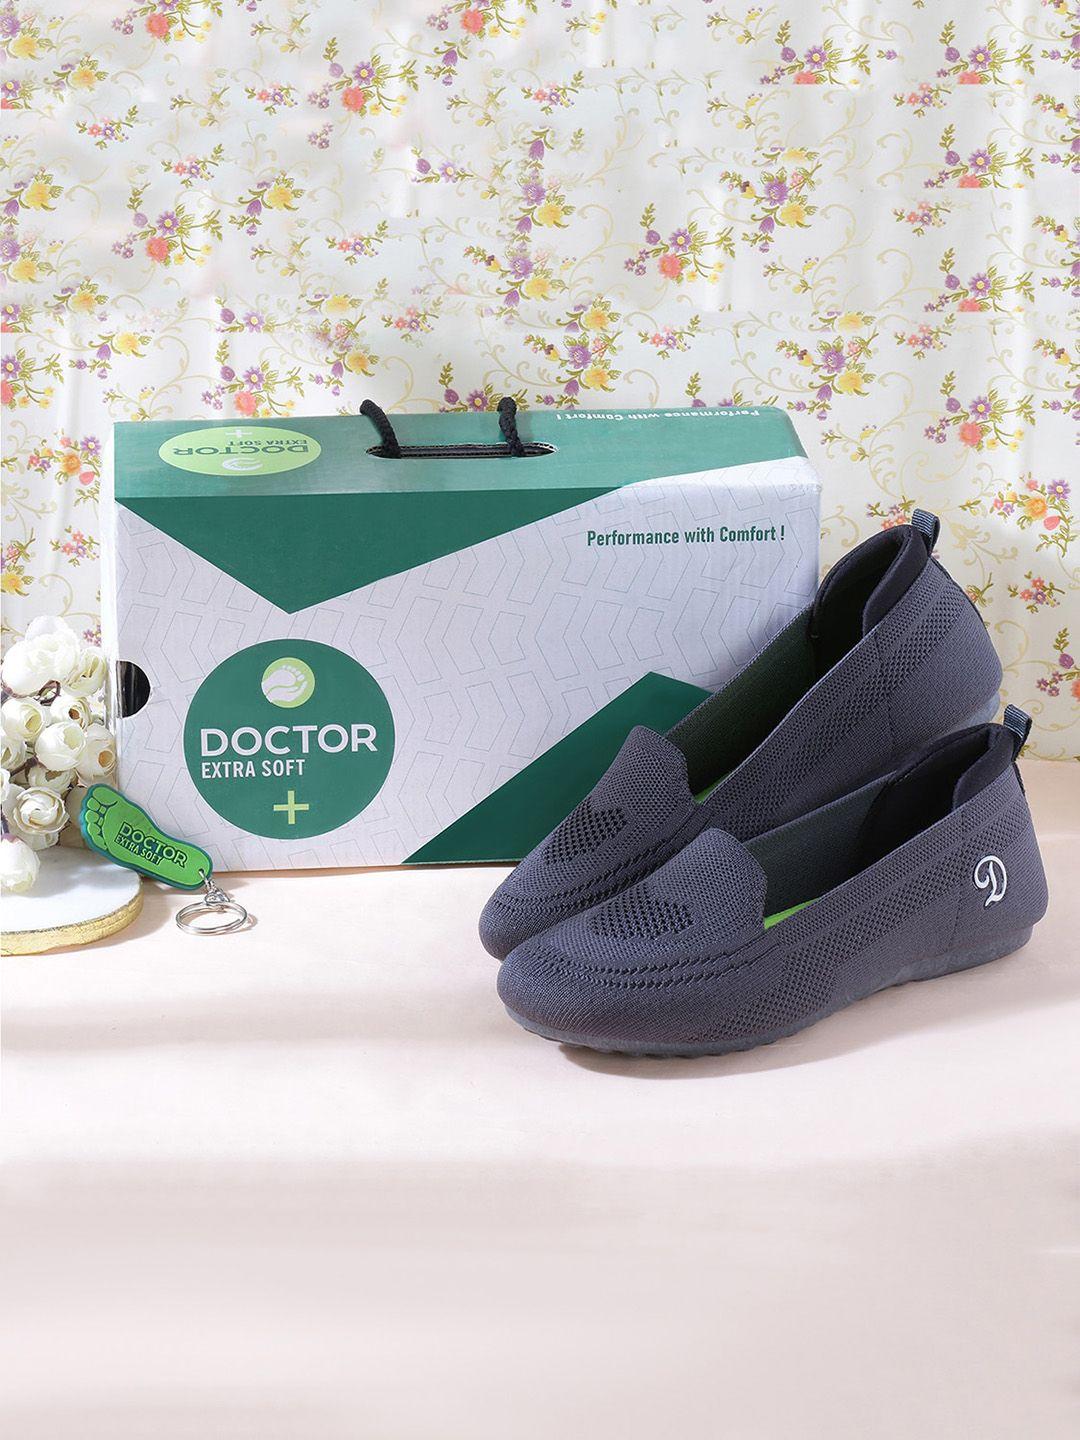 doctor-extra-soft-women-perforations-lightweight-slip-on-sneakers